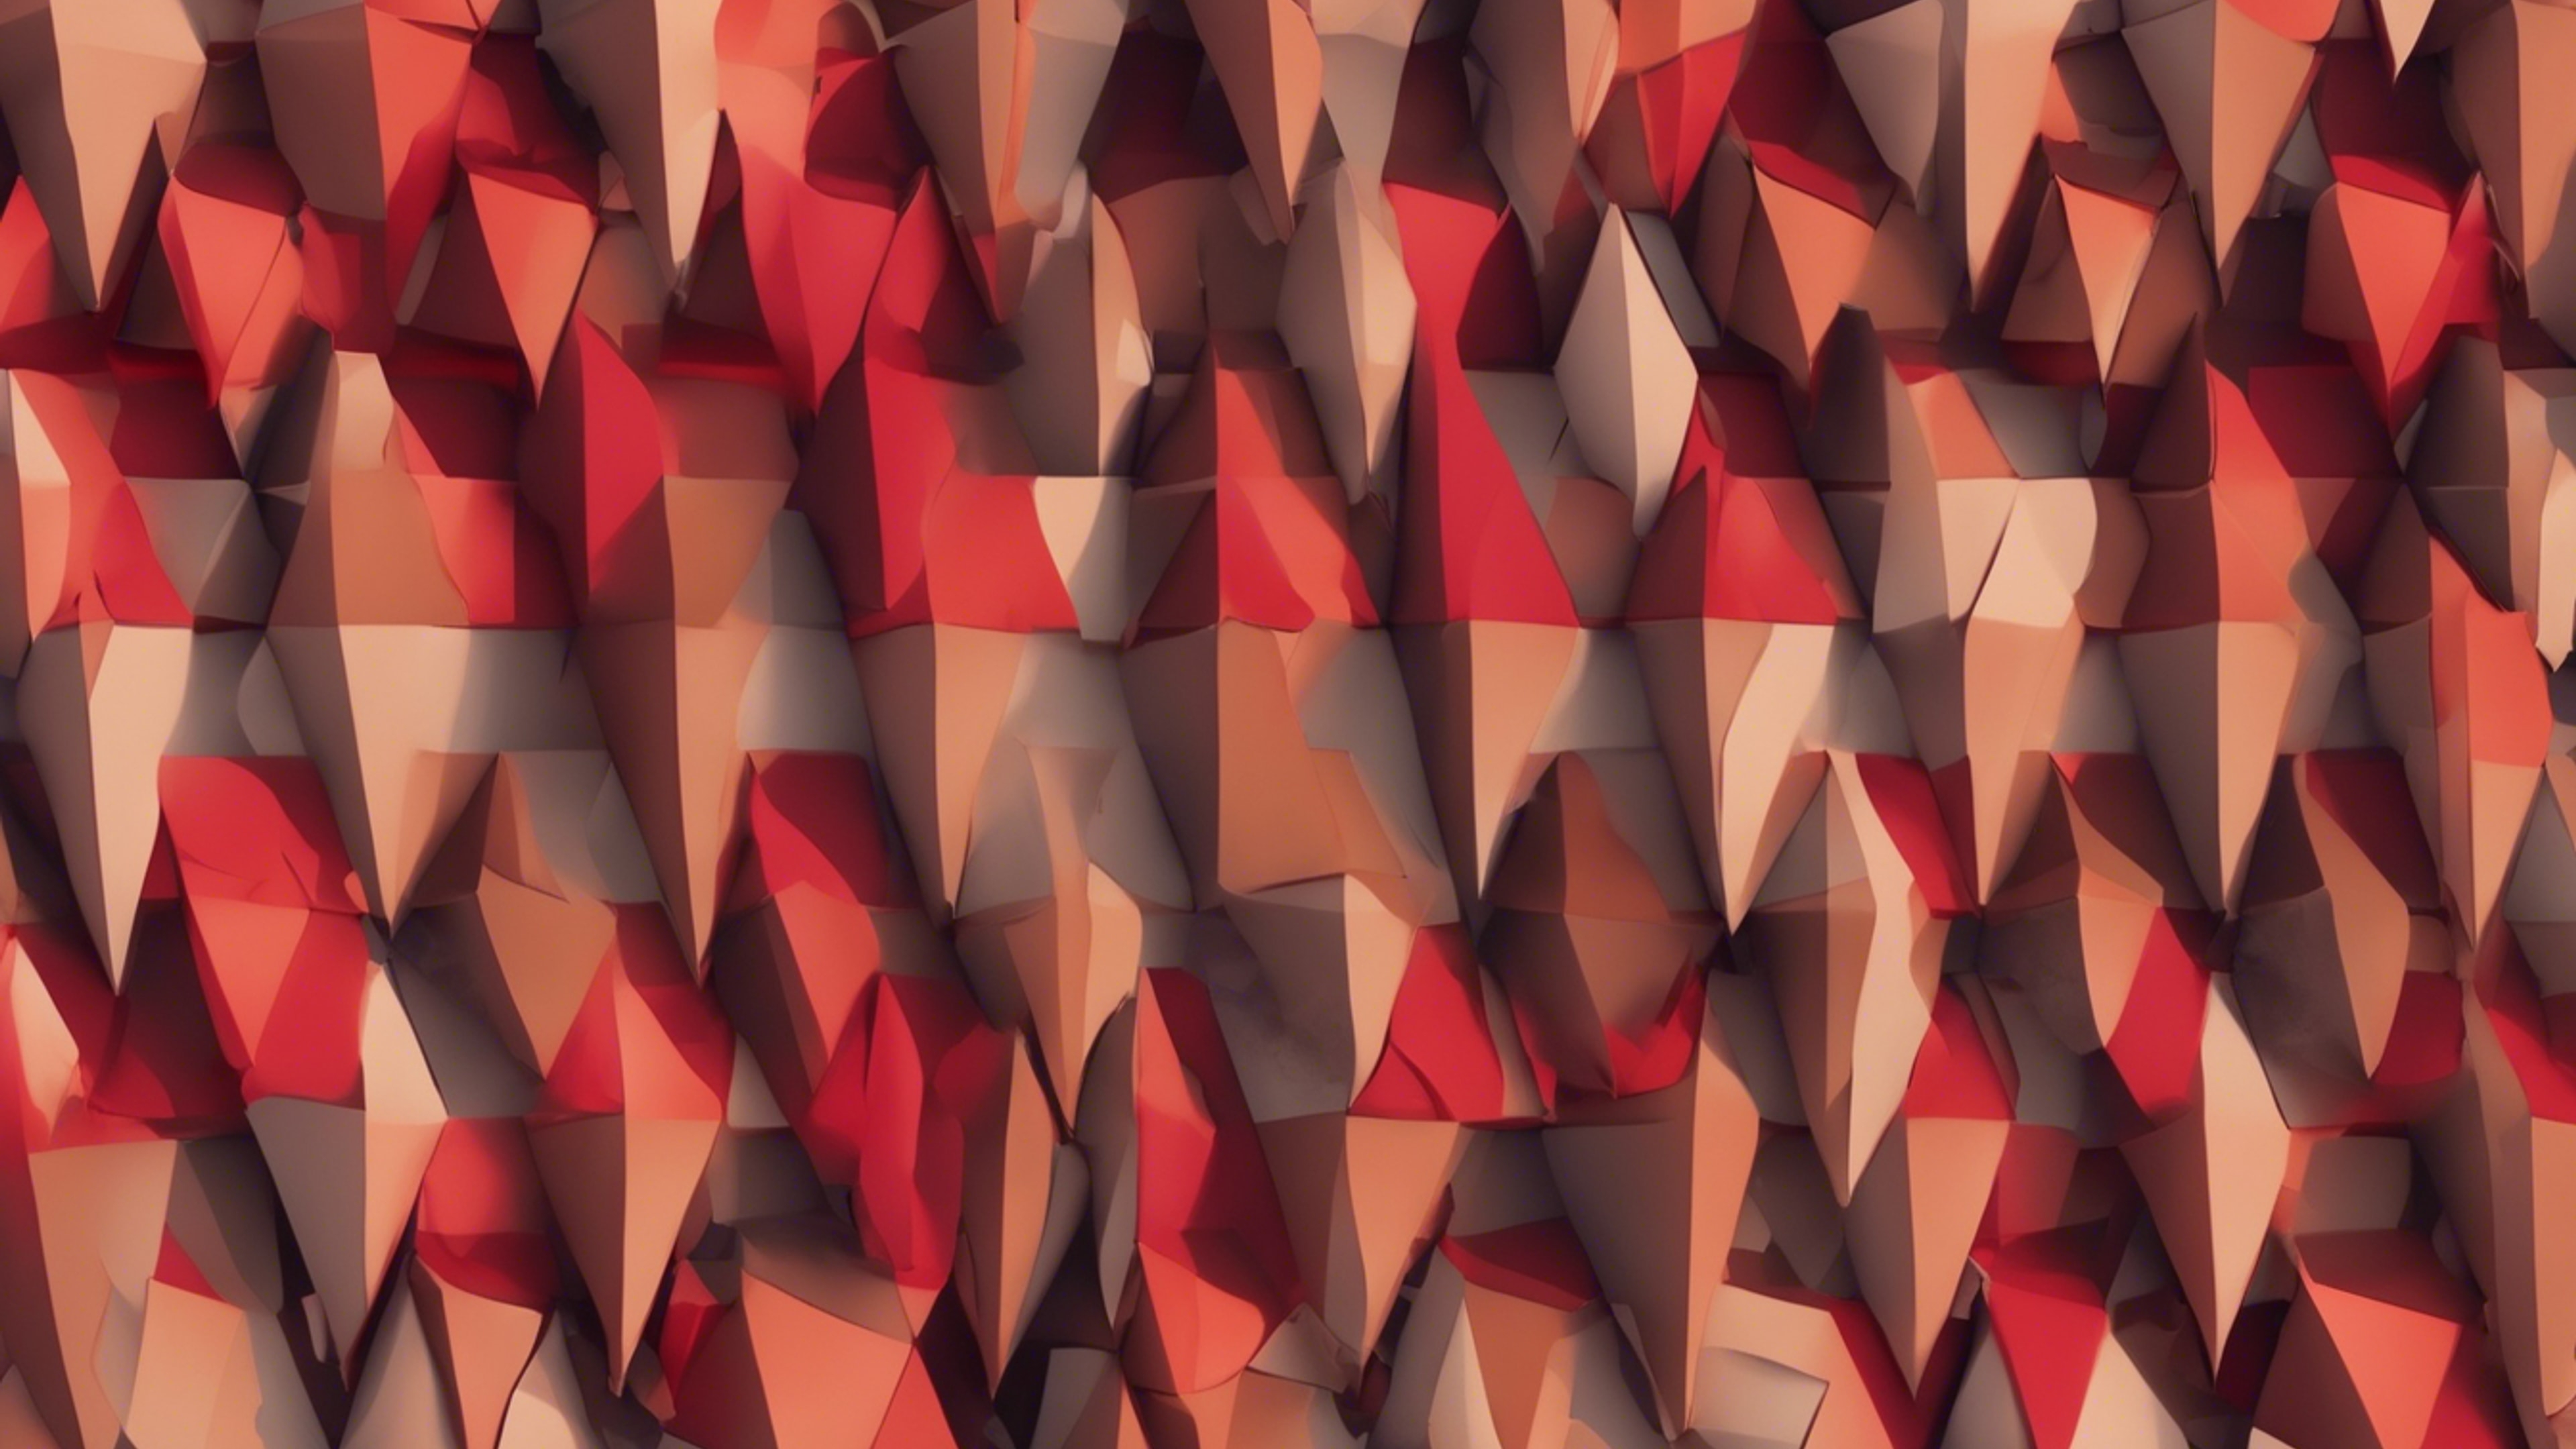 A geometrical abstract pattern consisting of trapeziums in shades of vibrant red and muted brown. Papel de parede[25af3713355d4095863a]